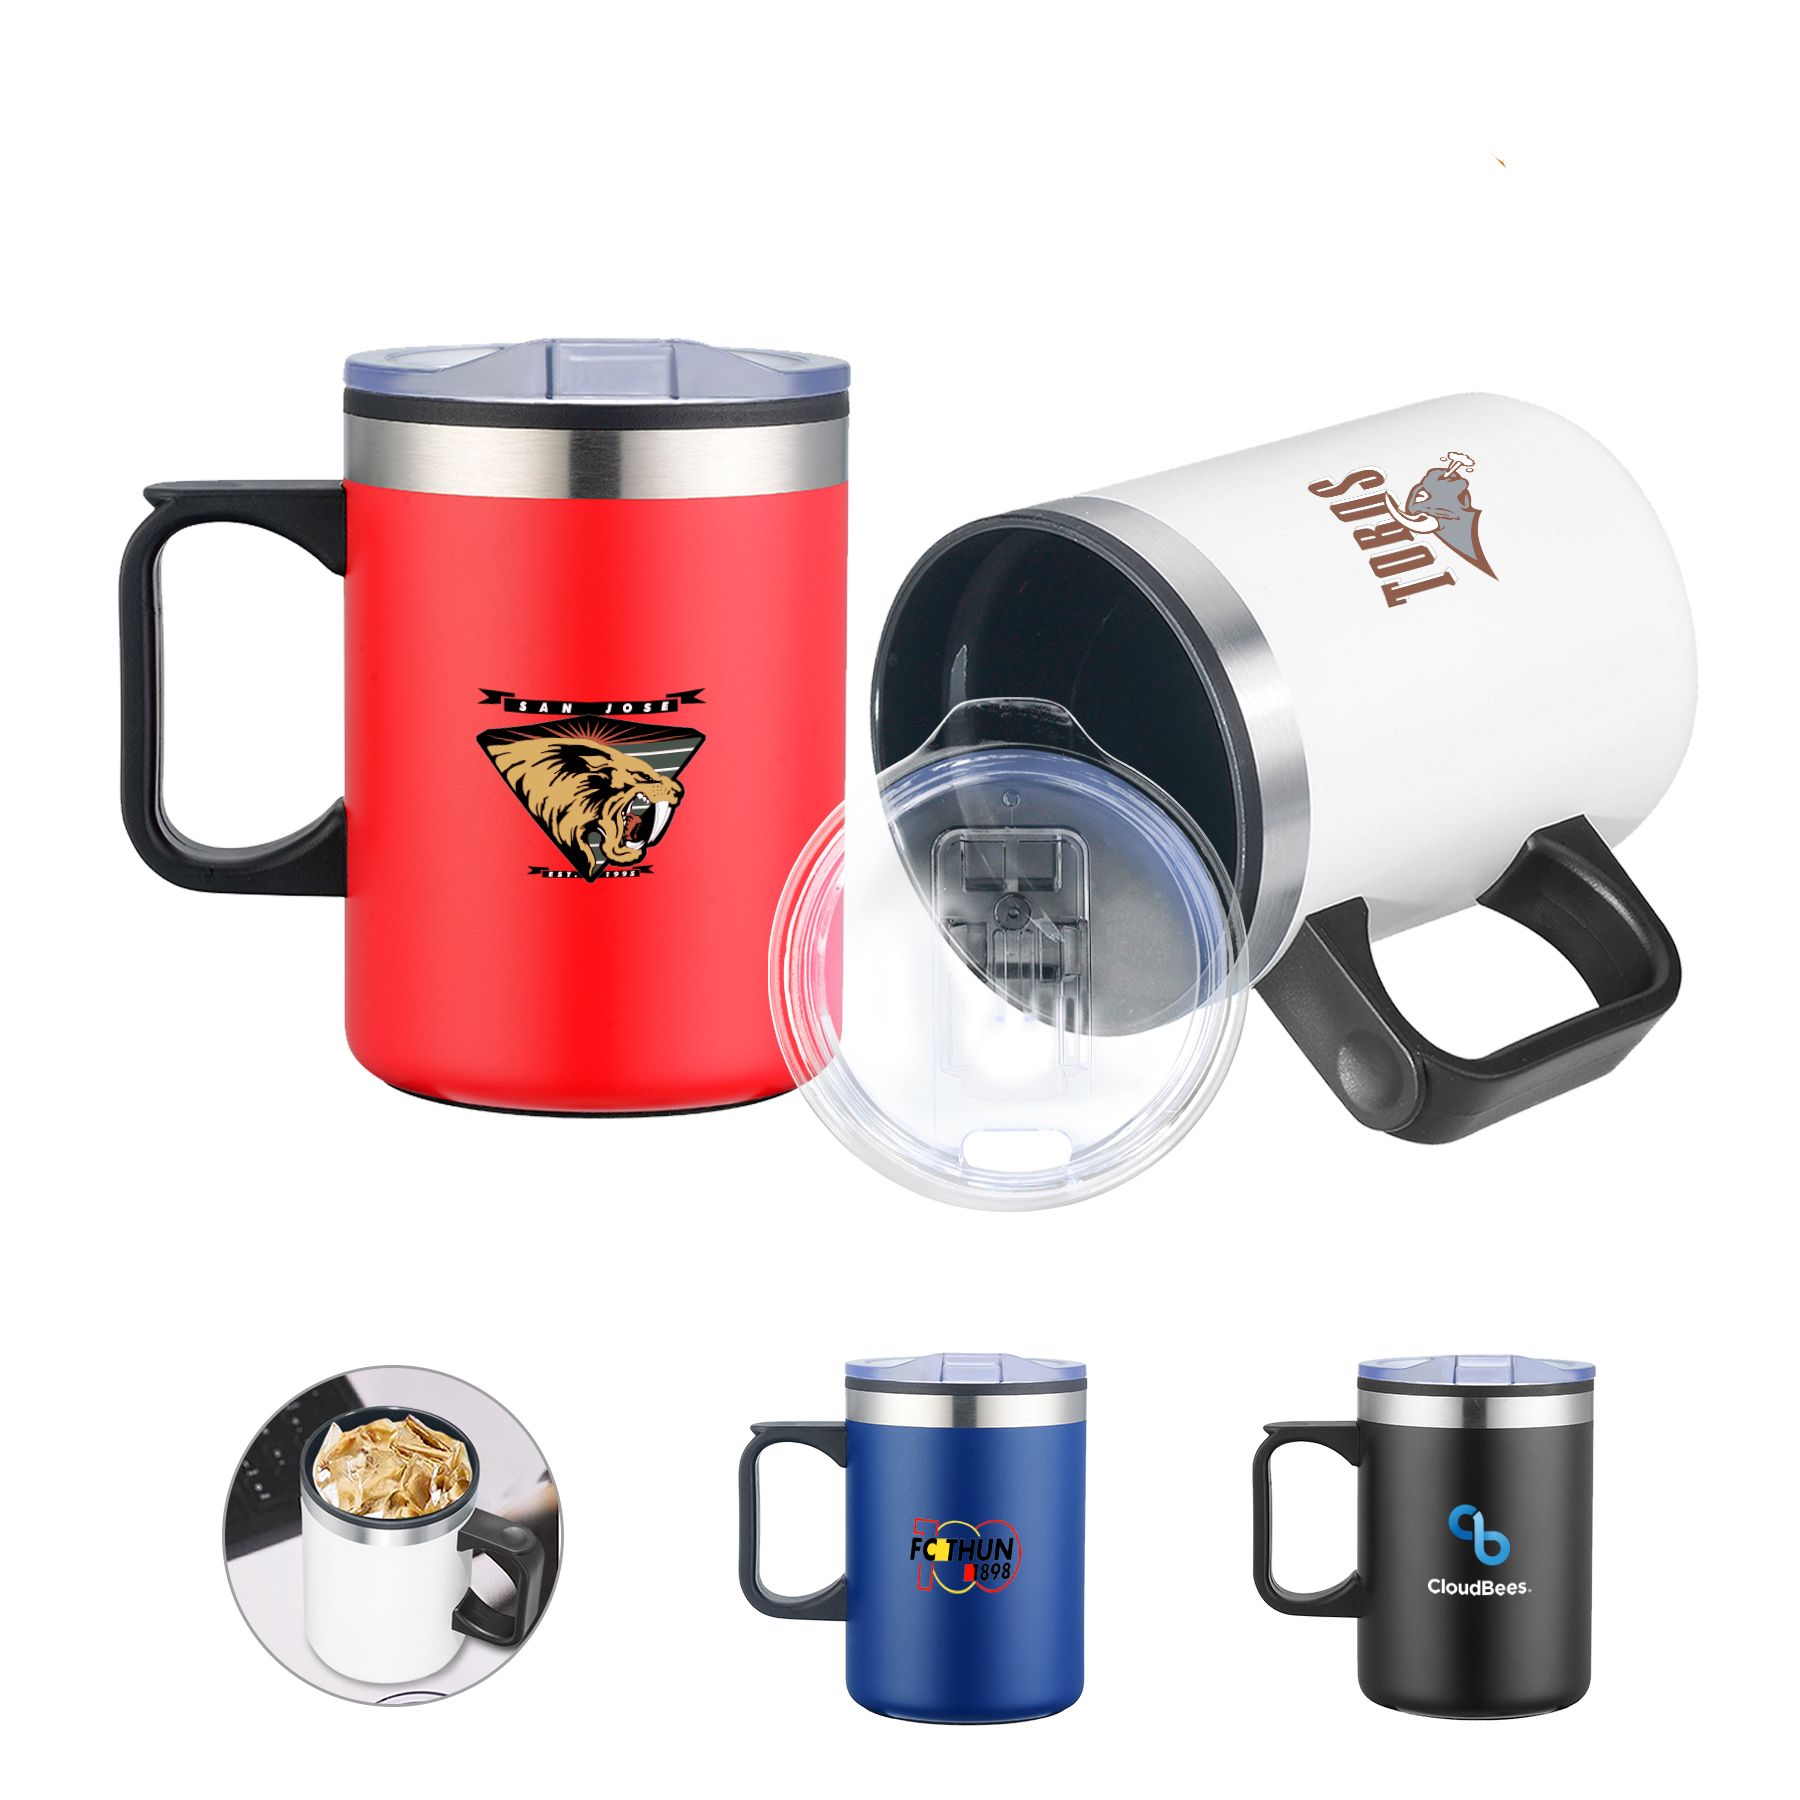 The Trooper 14oz. Double Wall Camping Mug With Handle